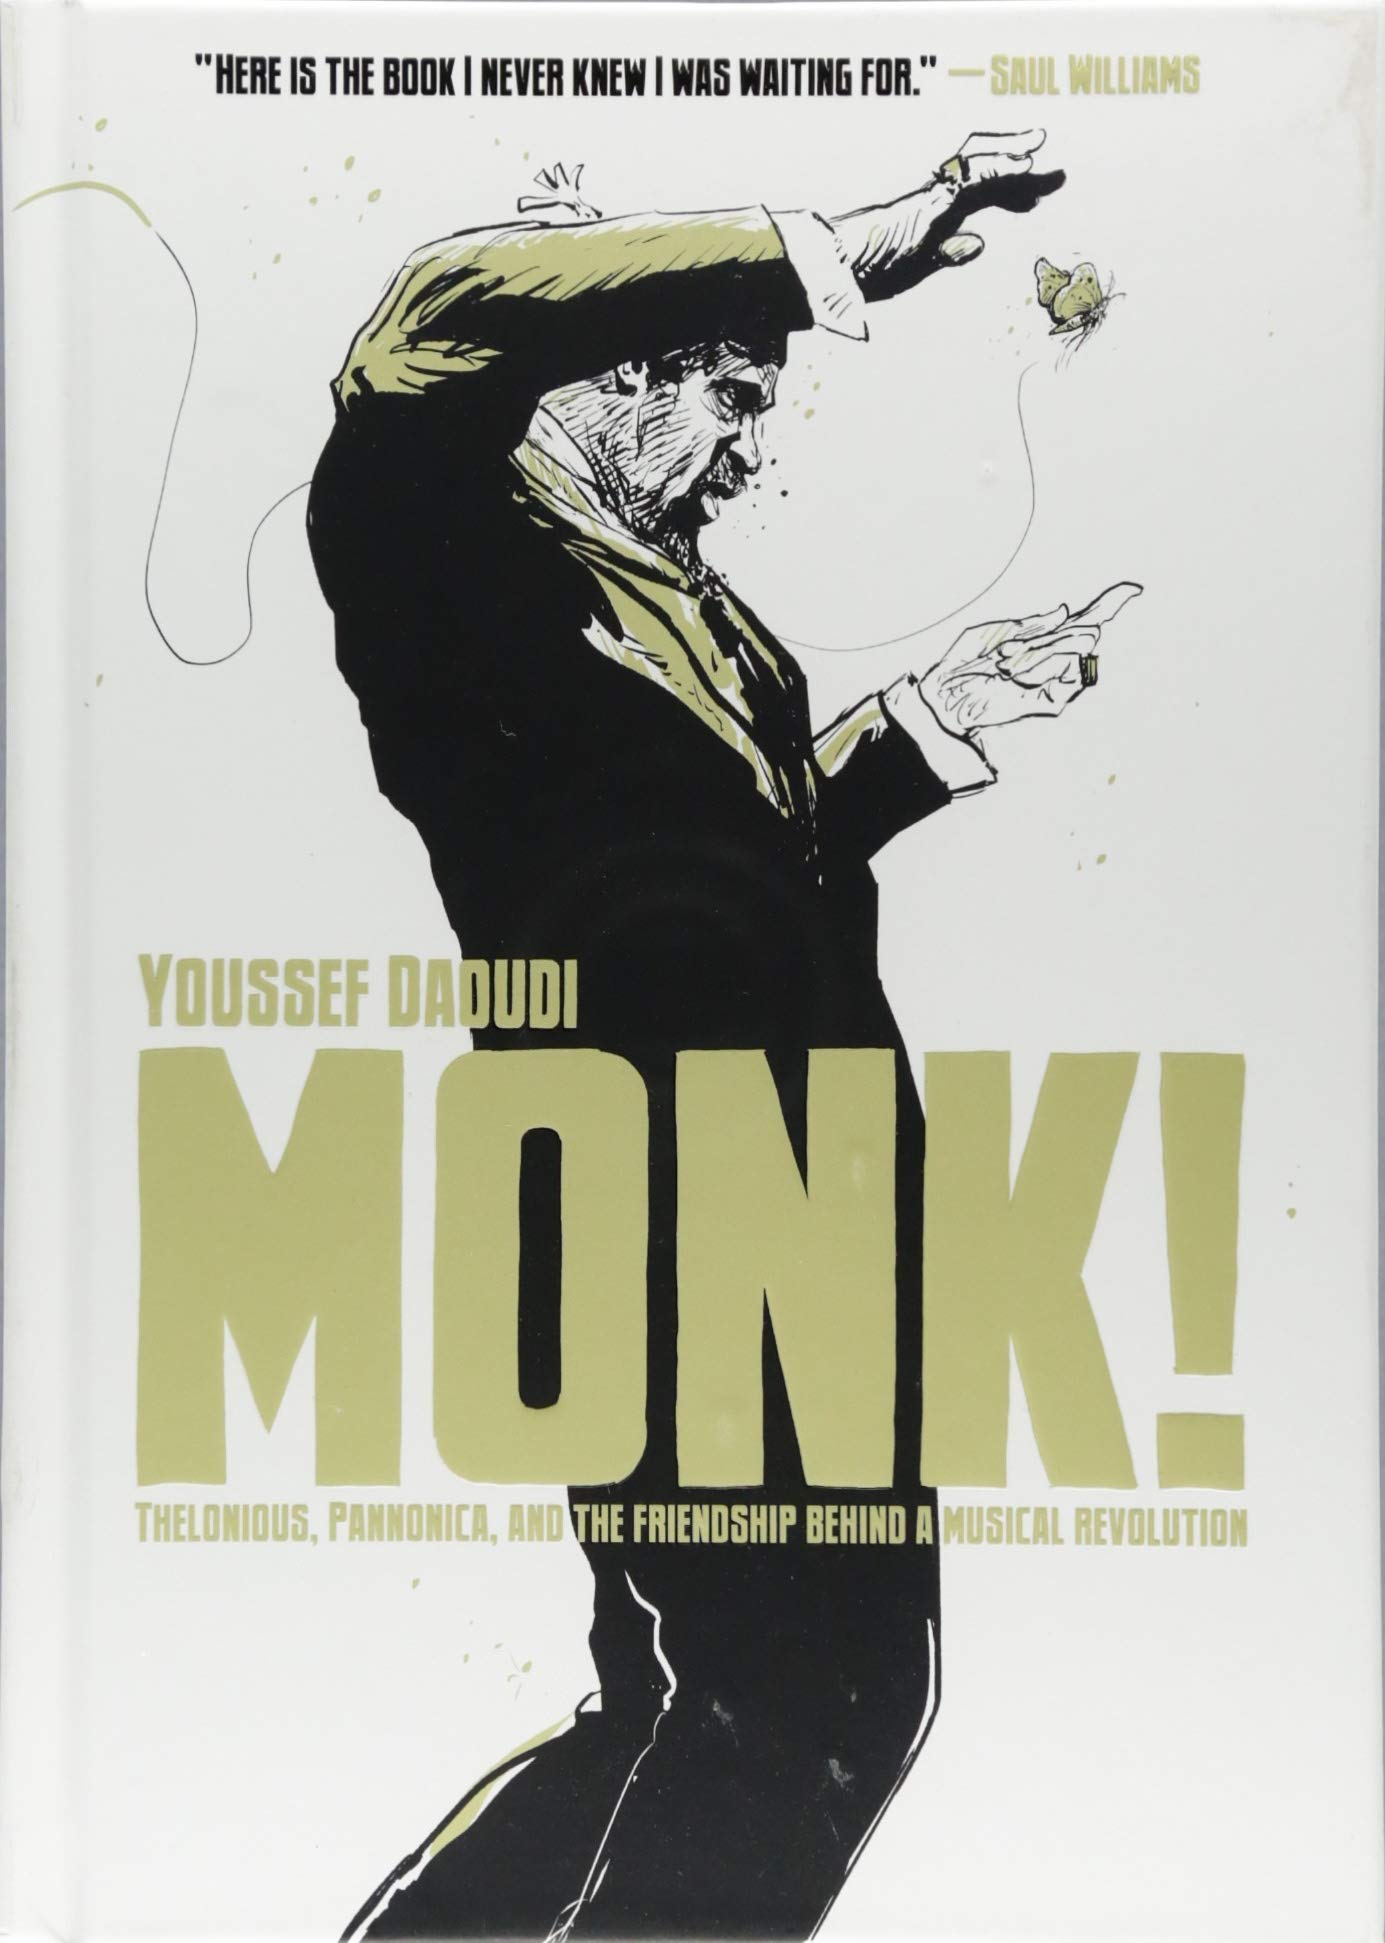 A book cover for Monk!: Thelonious, Pannonica, and the Friendship Behind a Musical Revolution